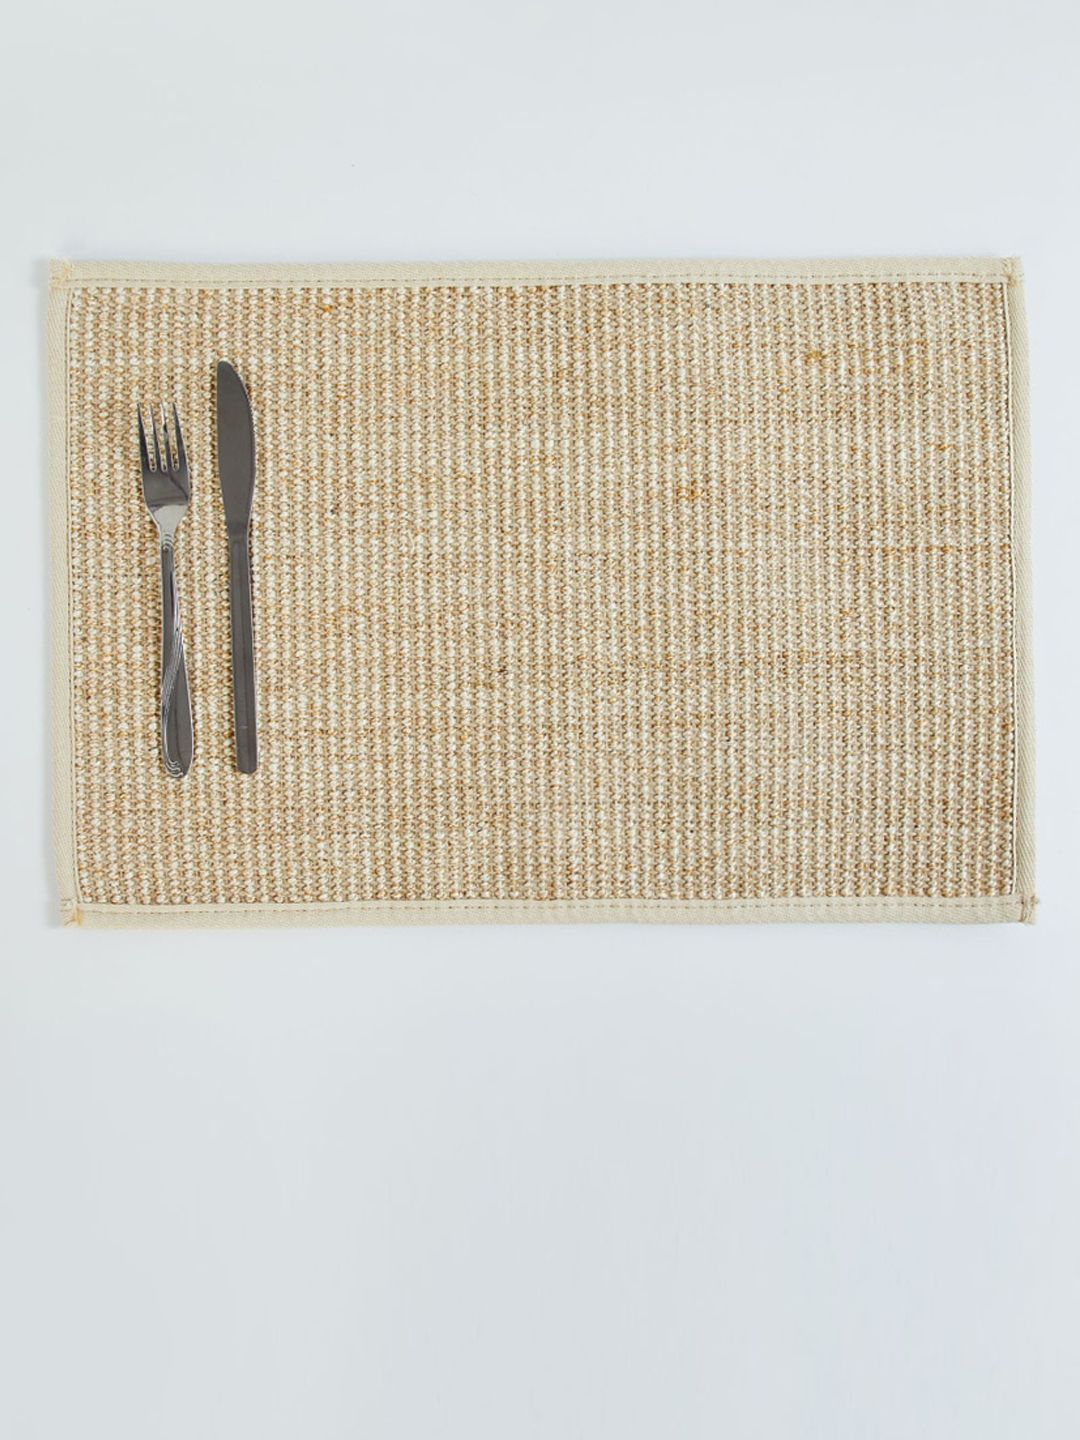 Home Centre Brown Woven Jute Placemat Price in India